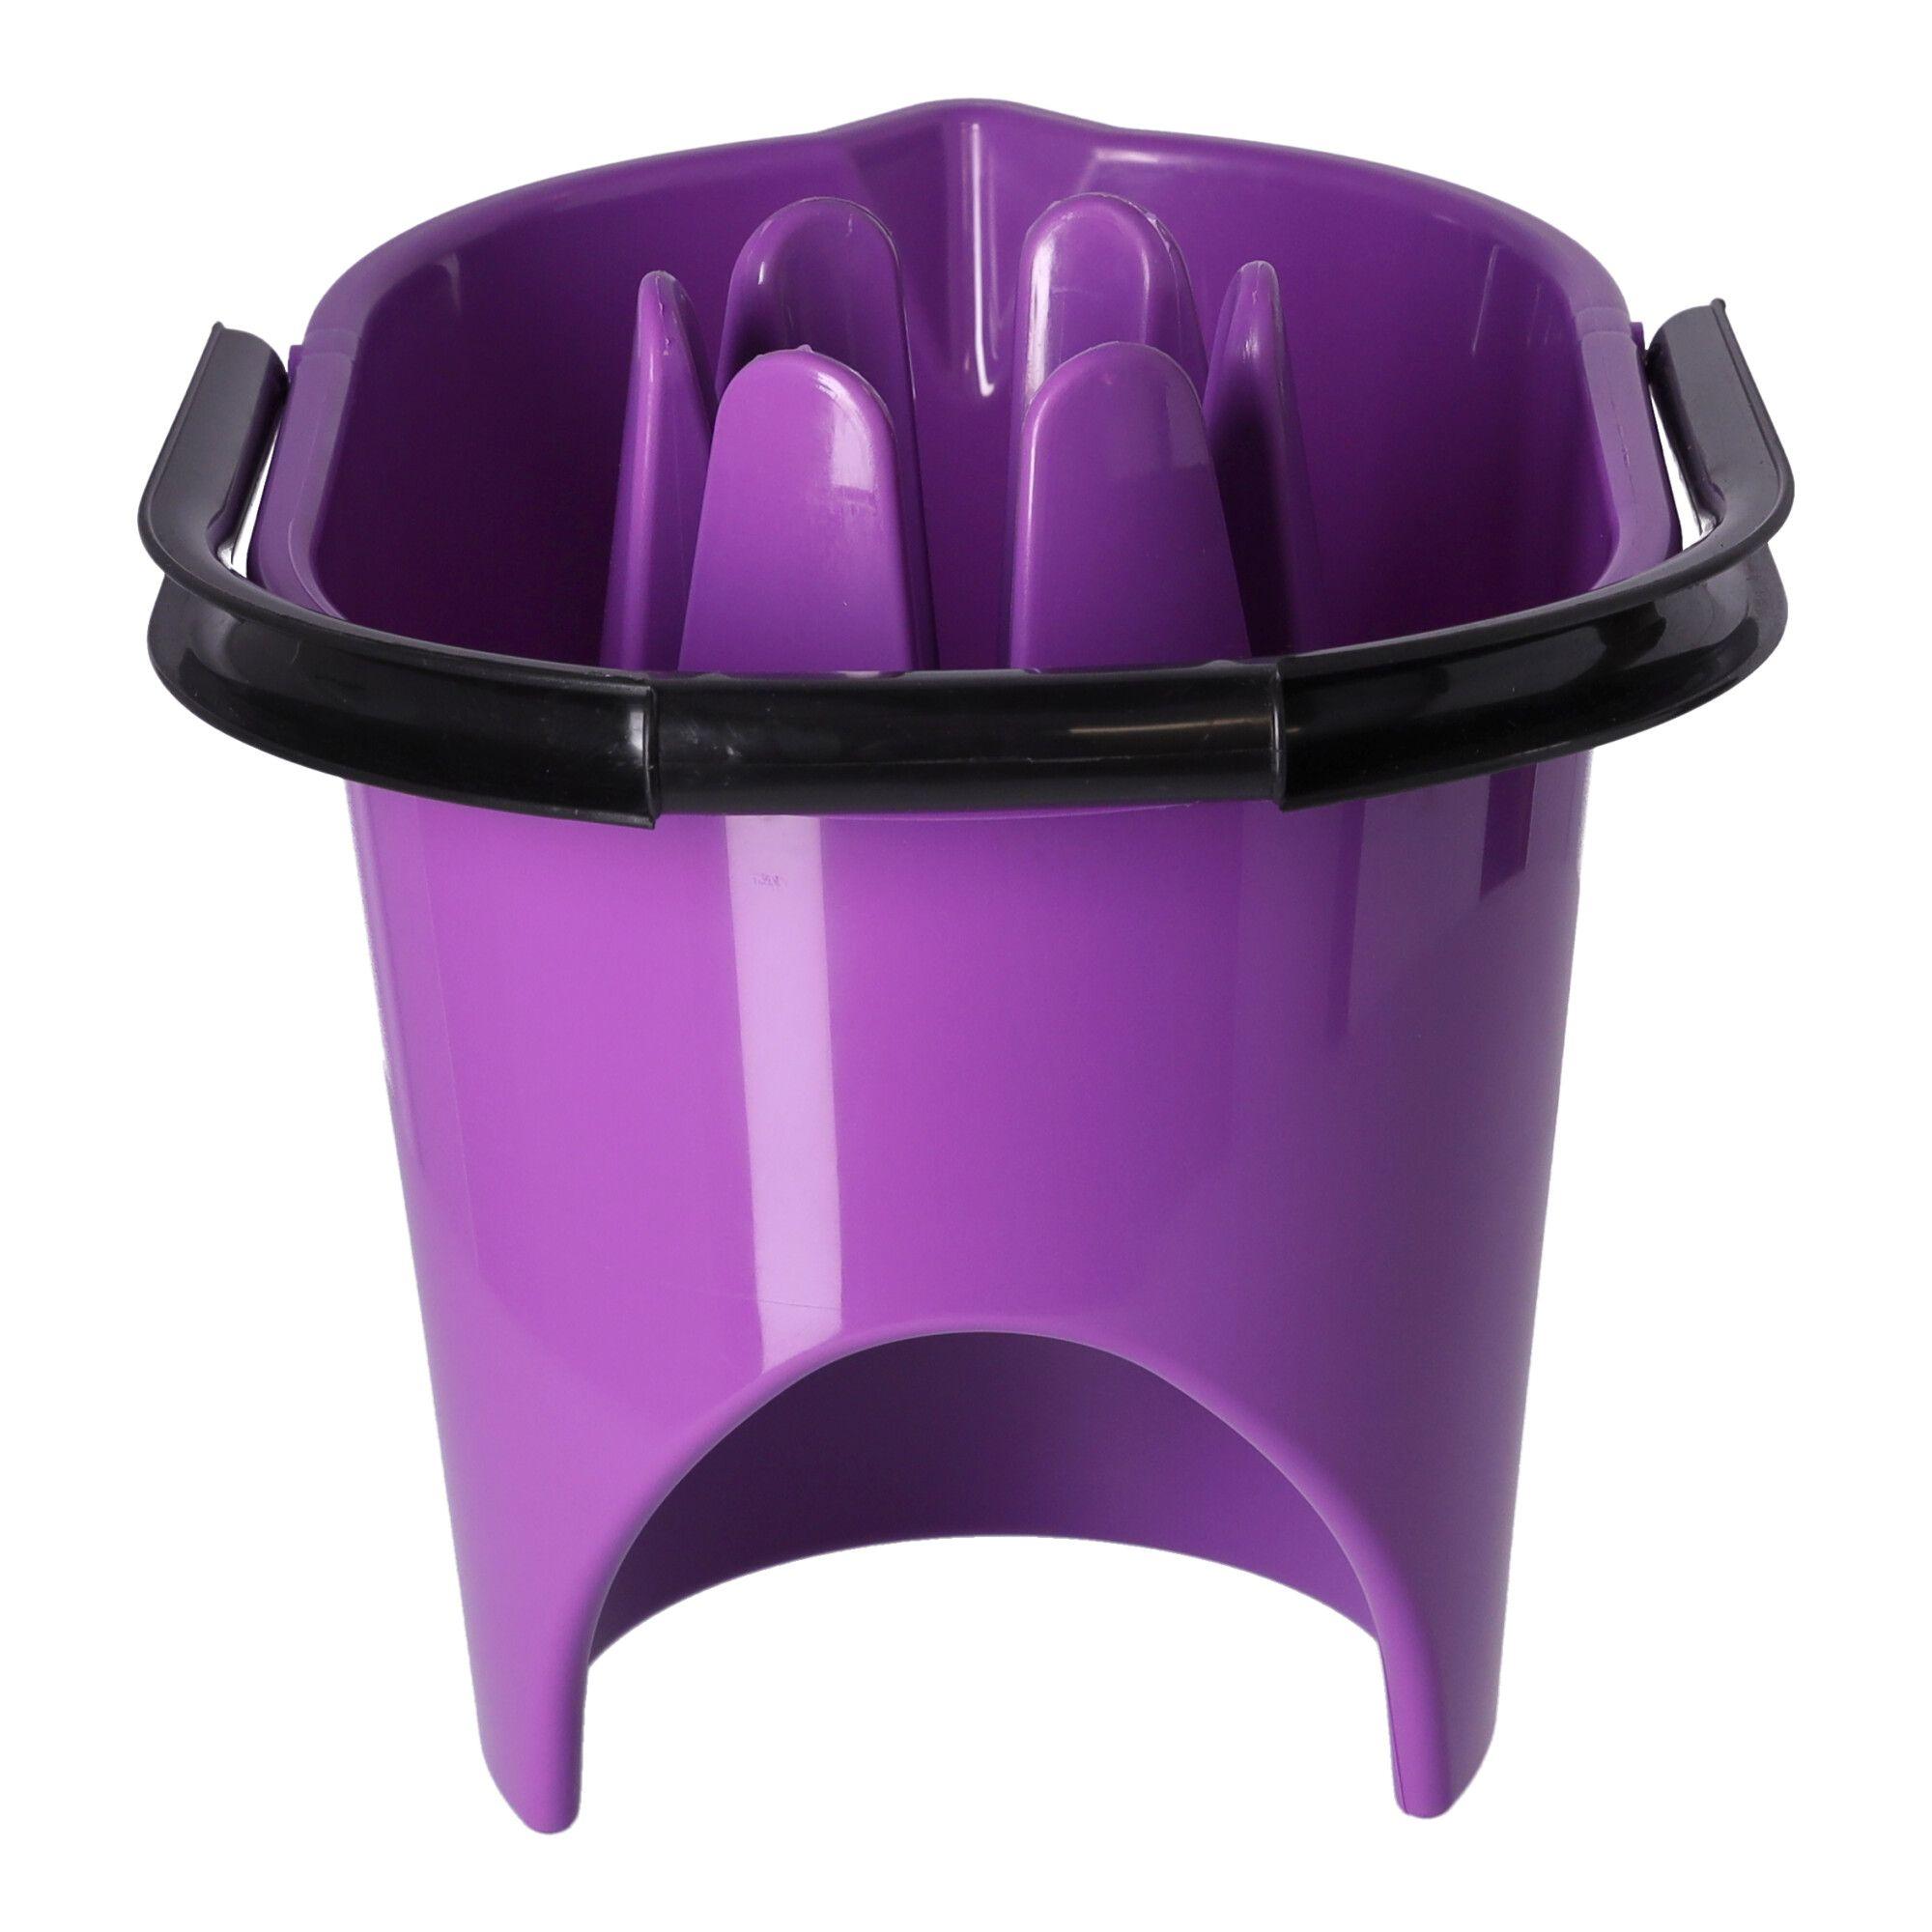 Mop bucket with squeezer, POLISH PRODUCT - purple